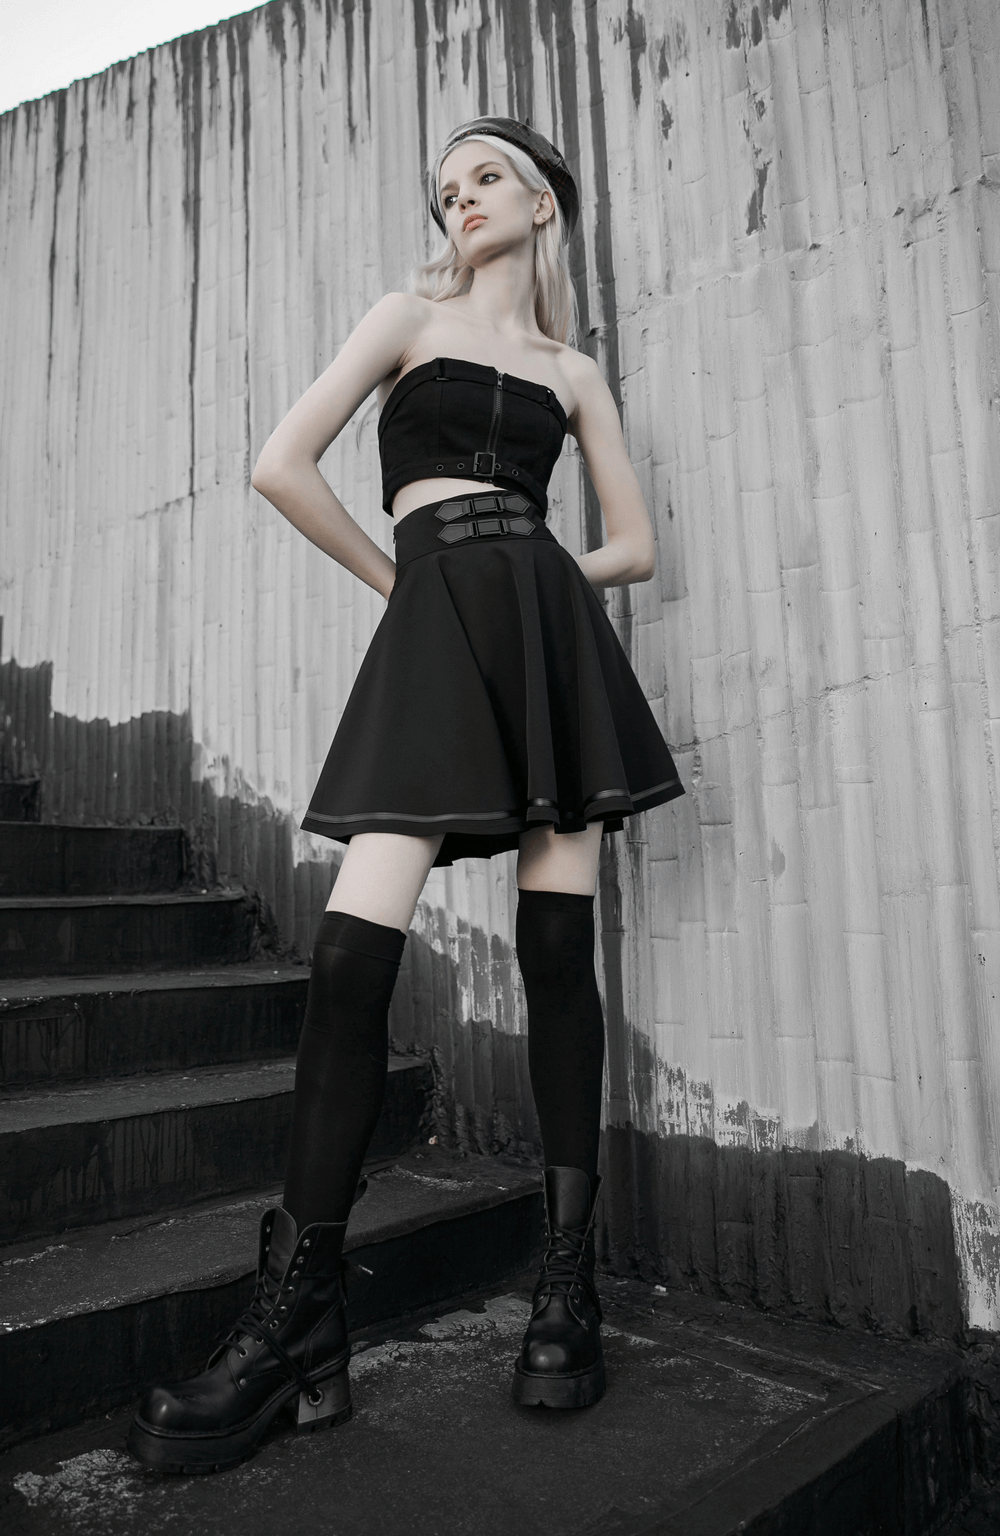 Punk Rave Black High-Waisted Skirt with Buckle